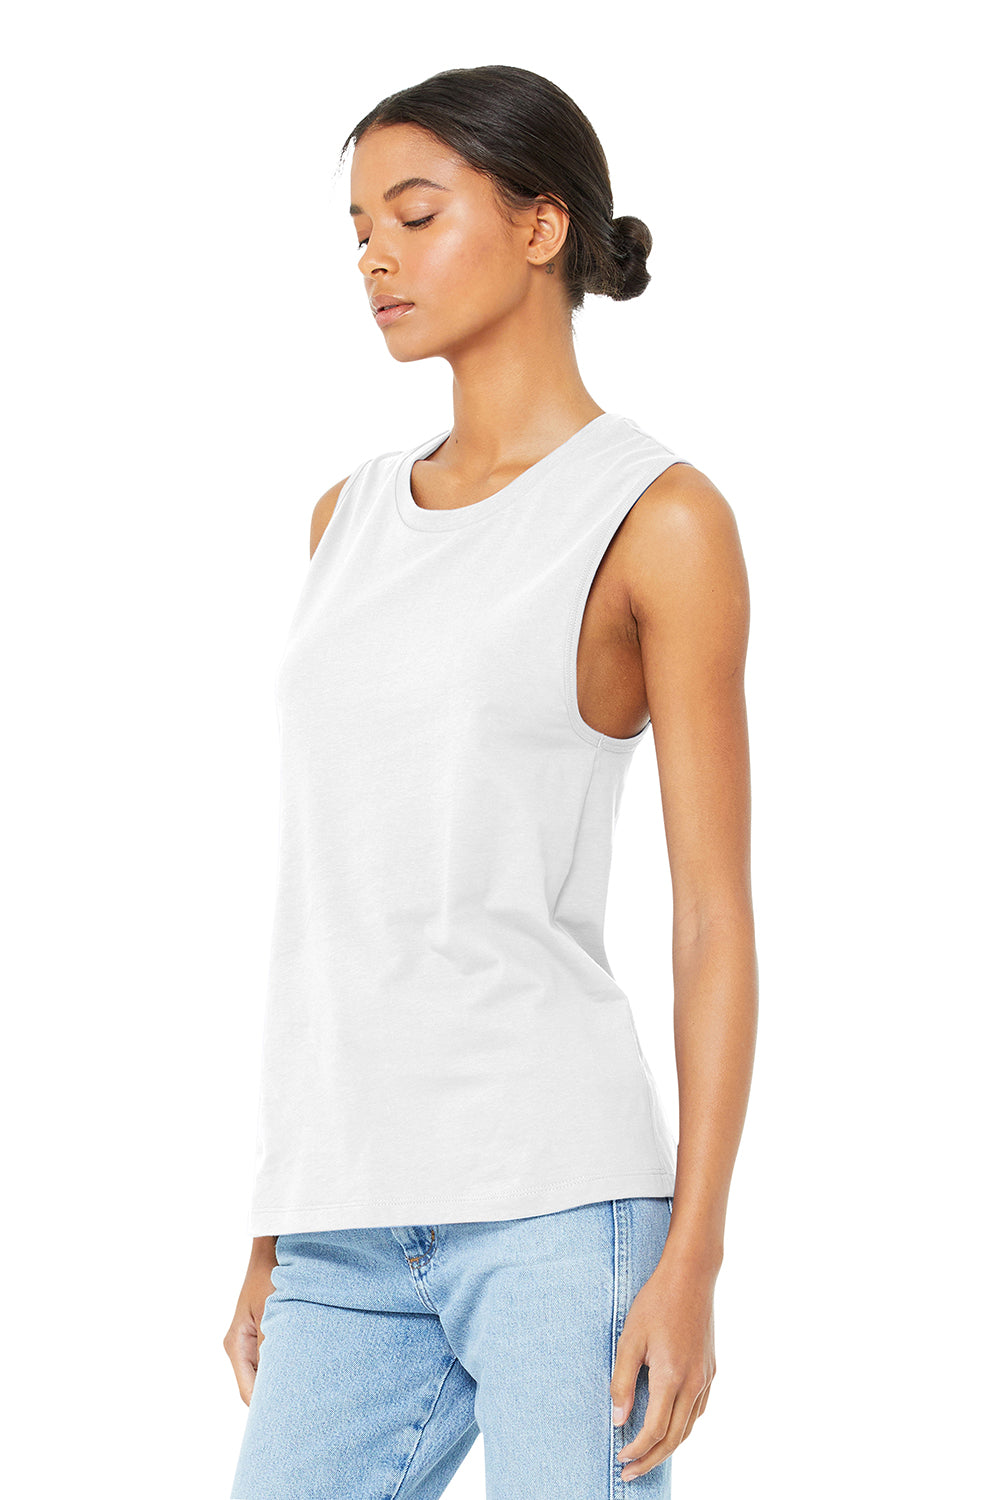 Bella + Canvas BC6003/B6003/6003 Womens Jersey Muscle Tank Top White Model 3Q